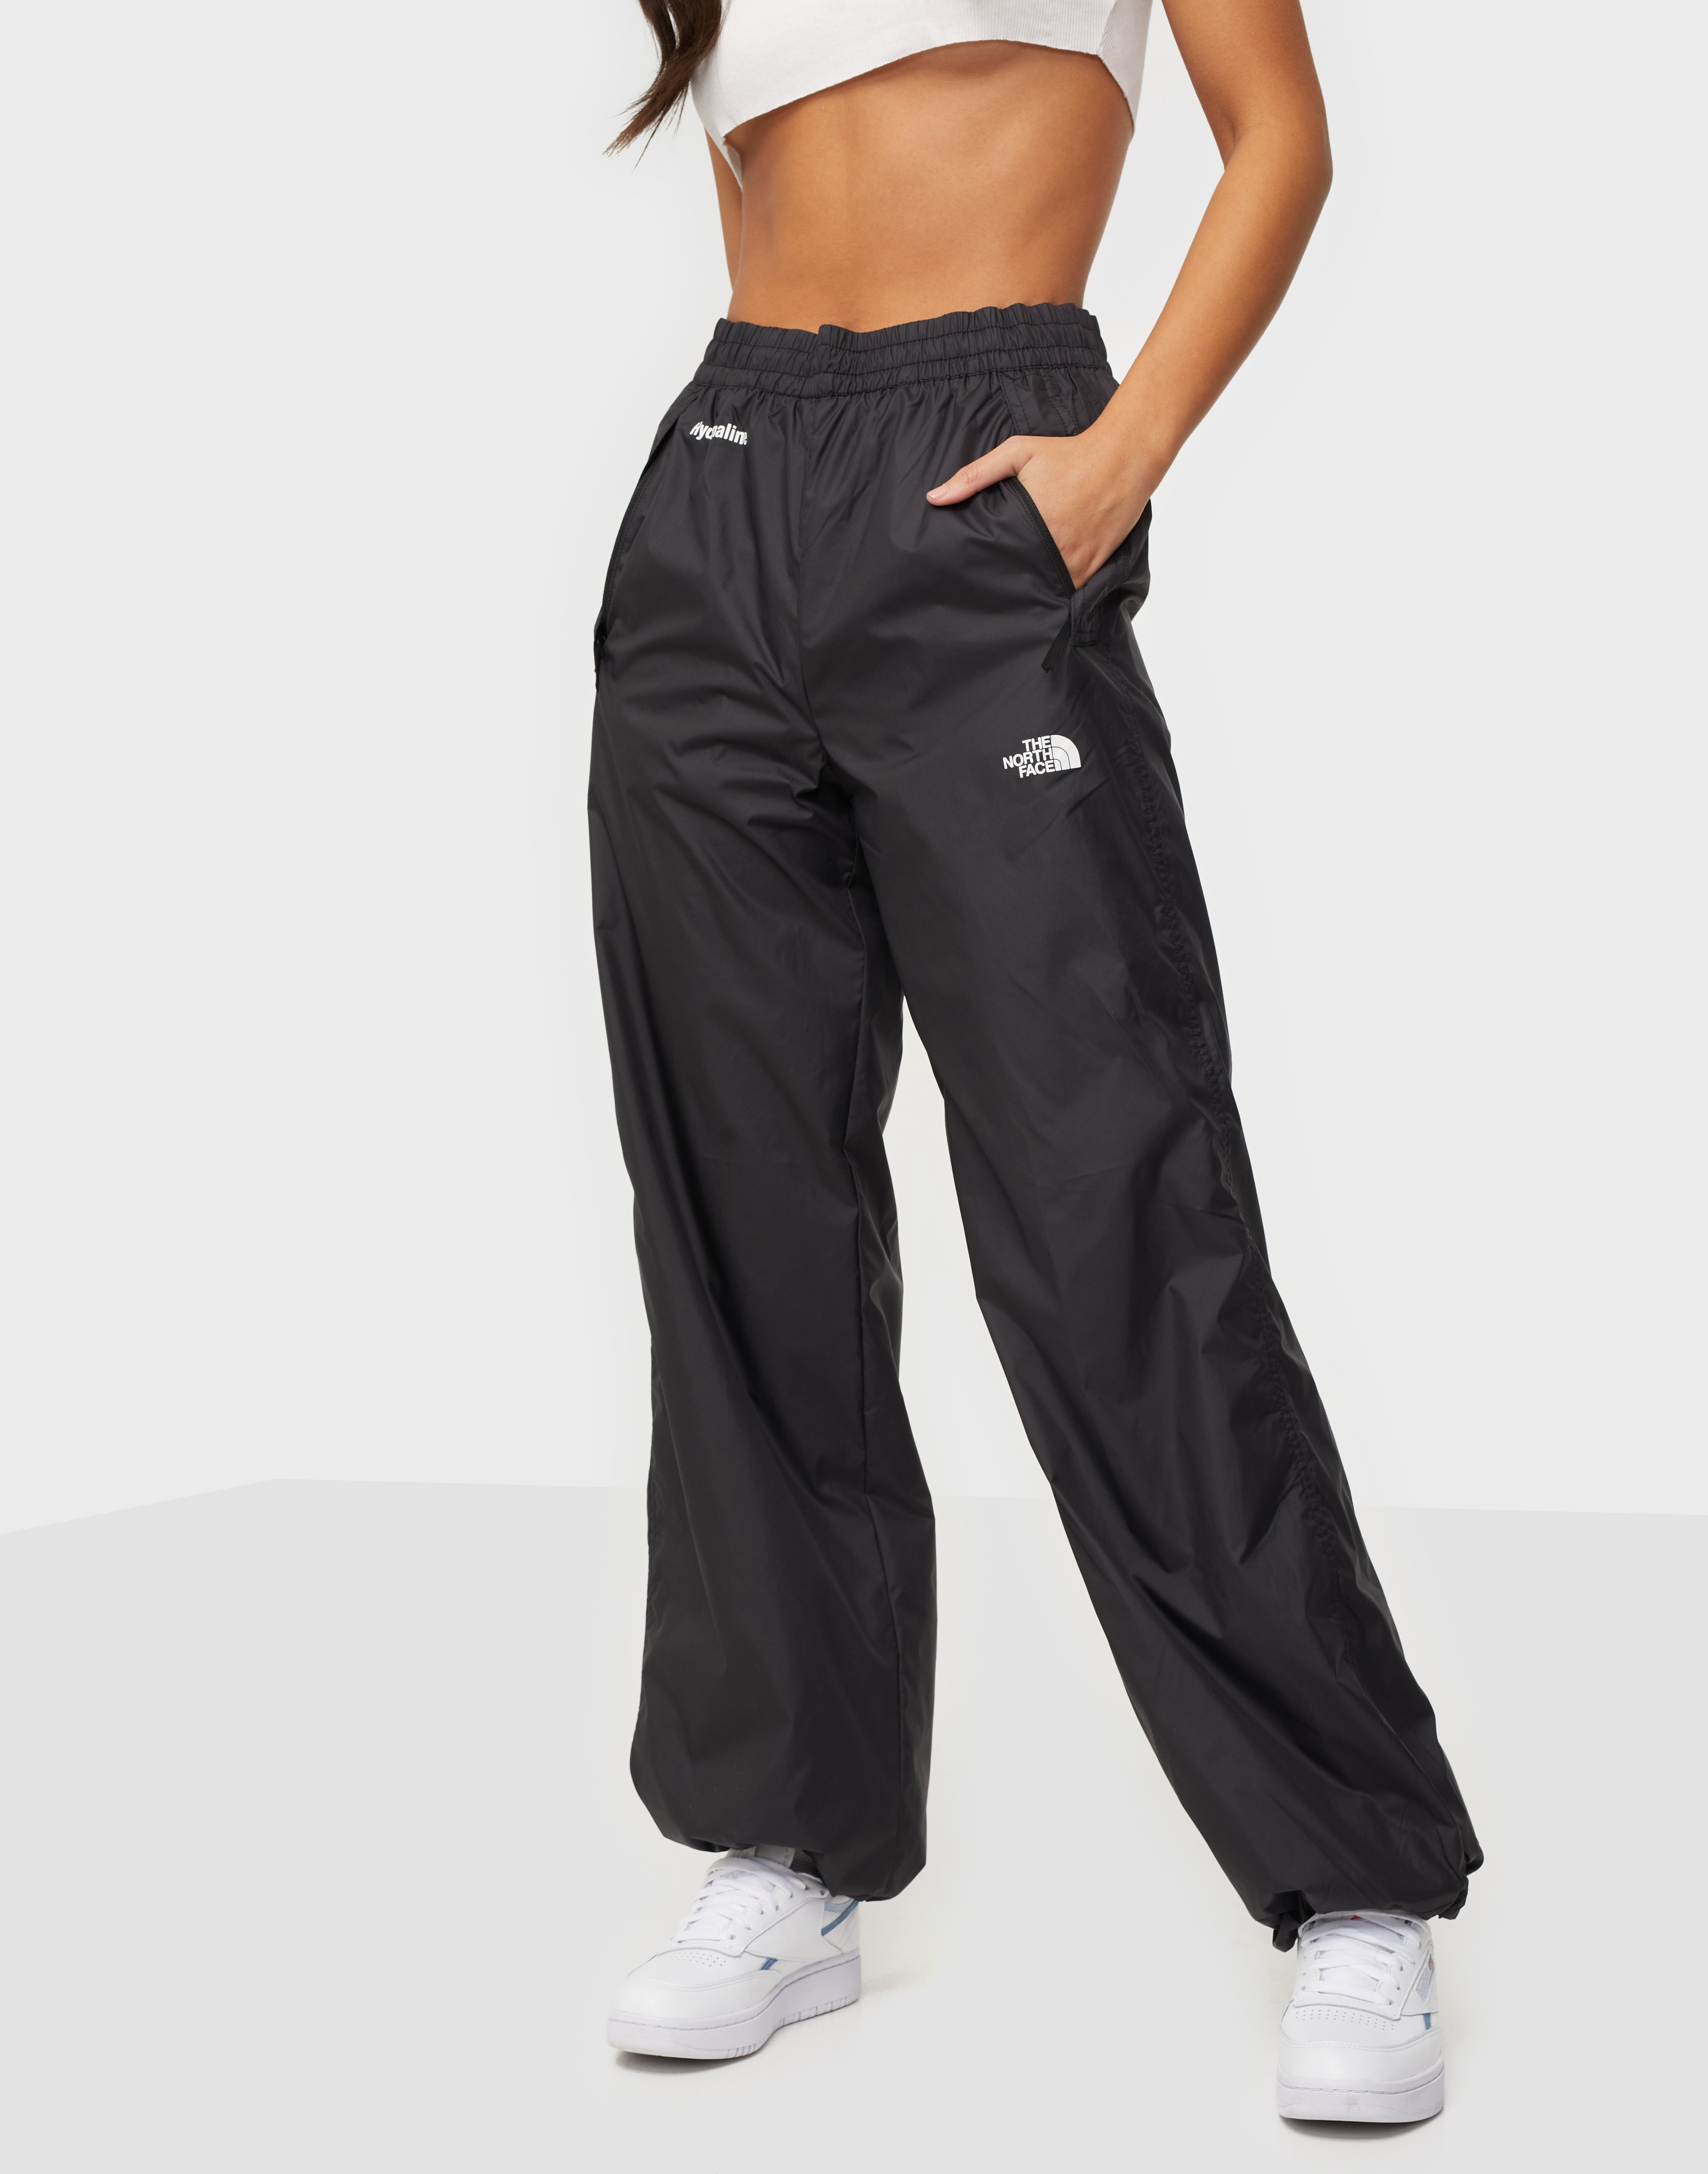 north face wind pants